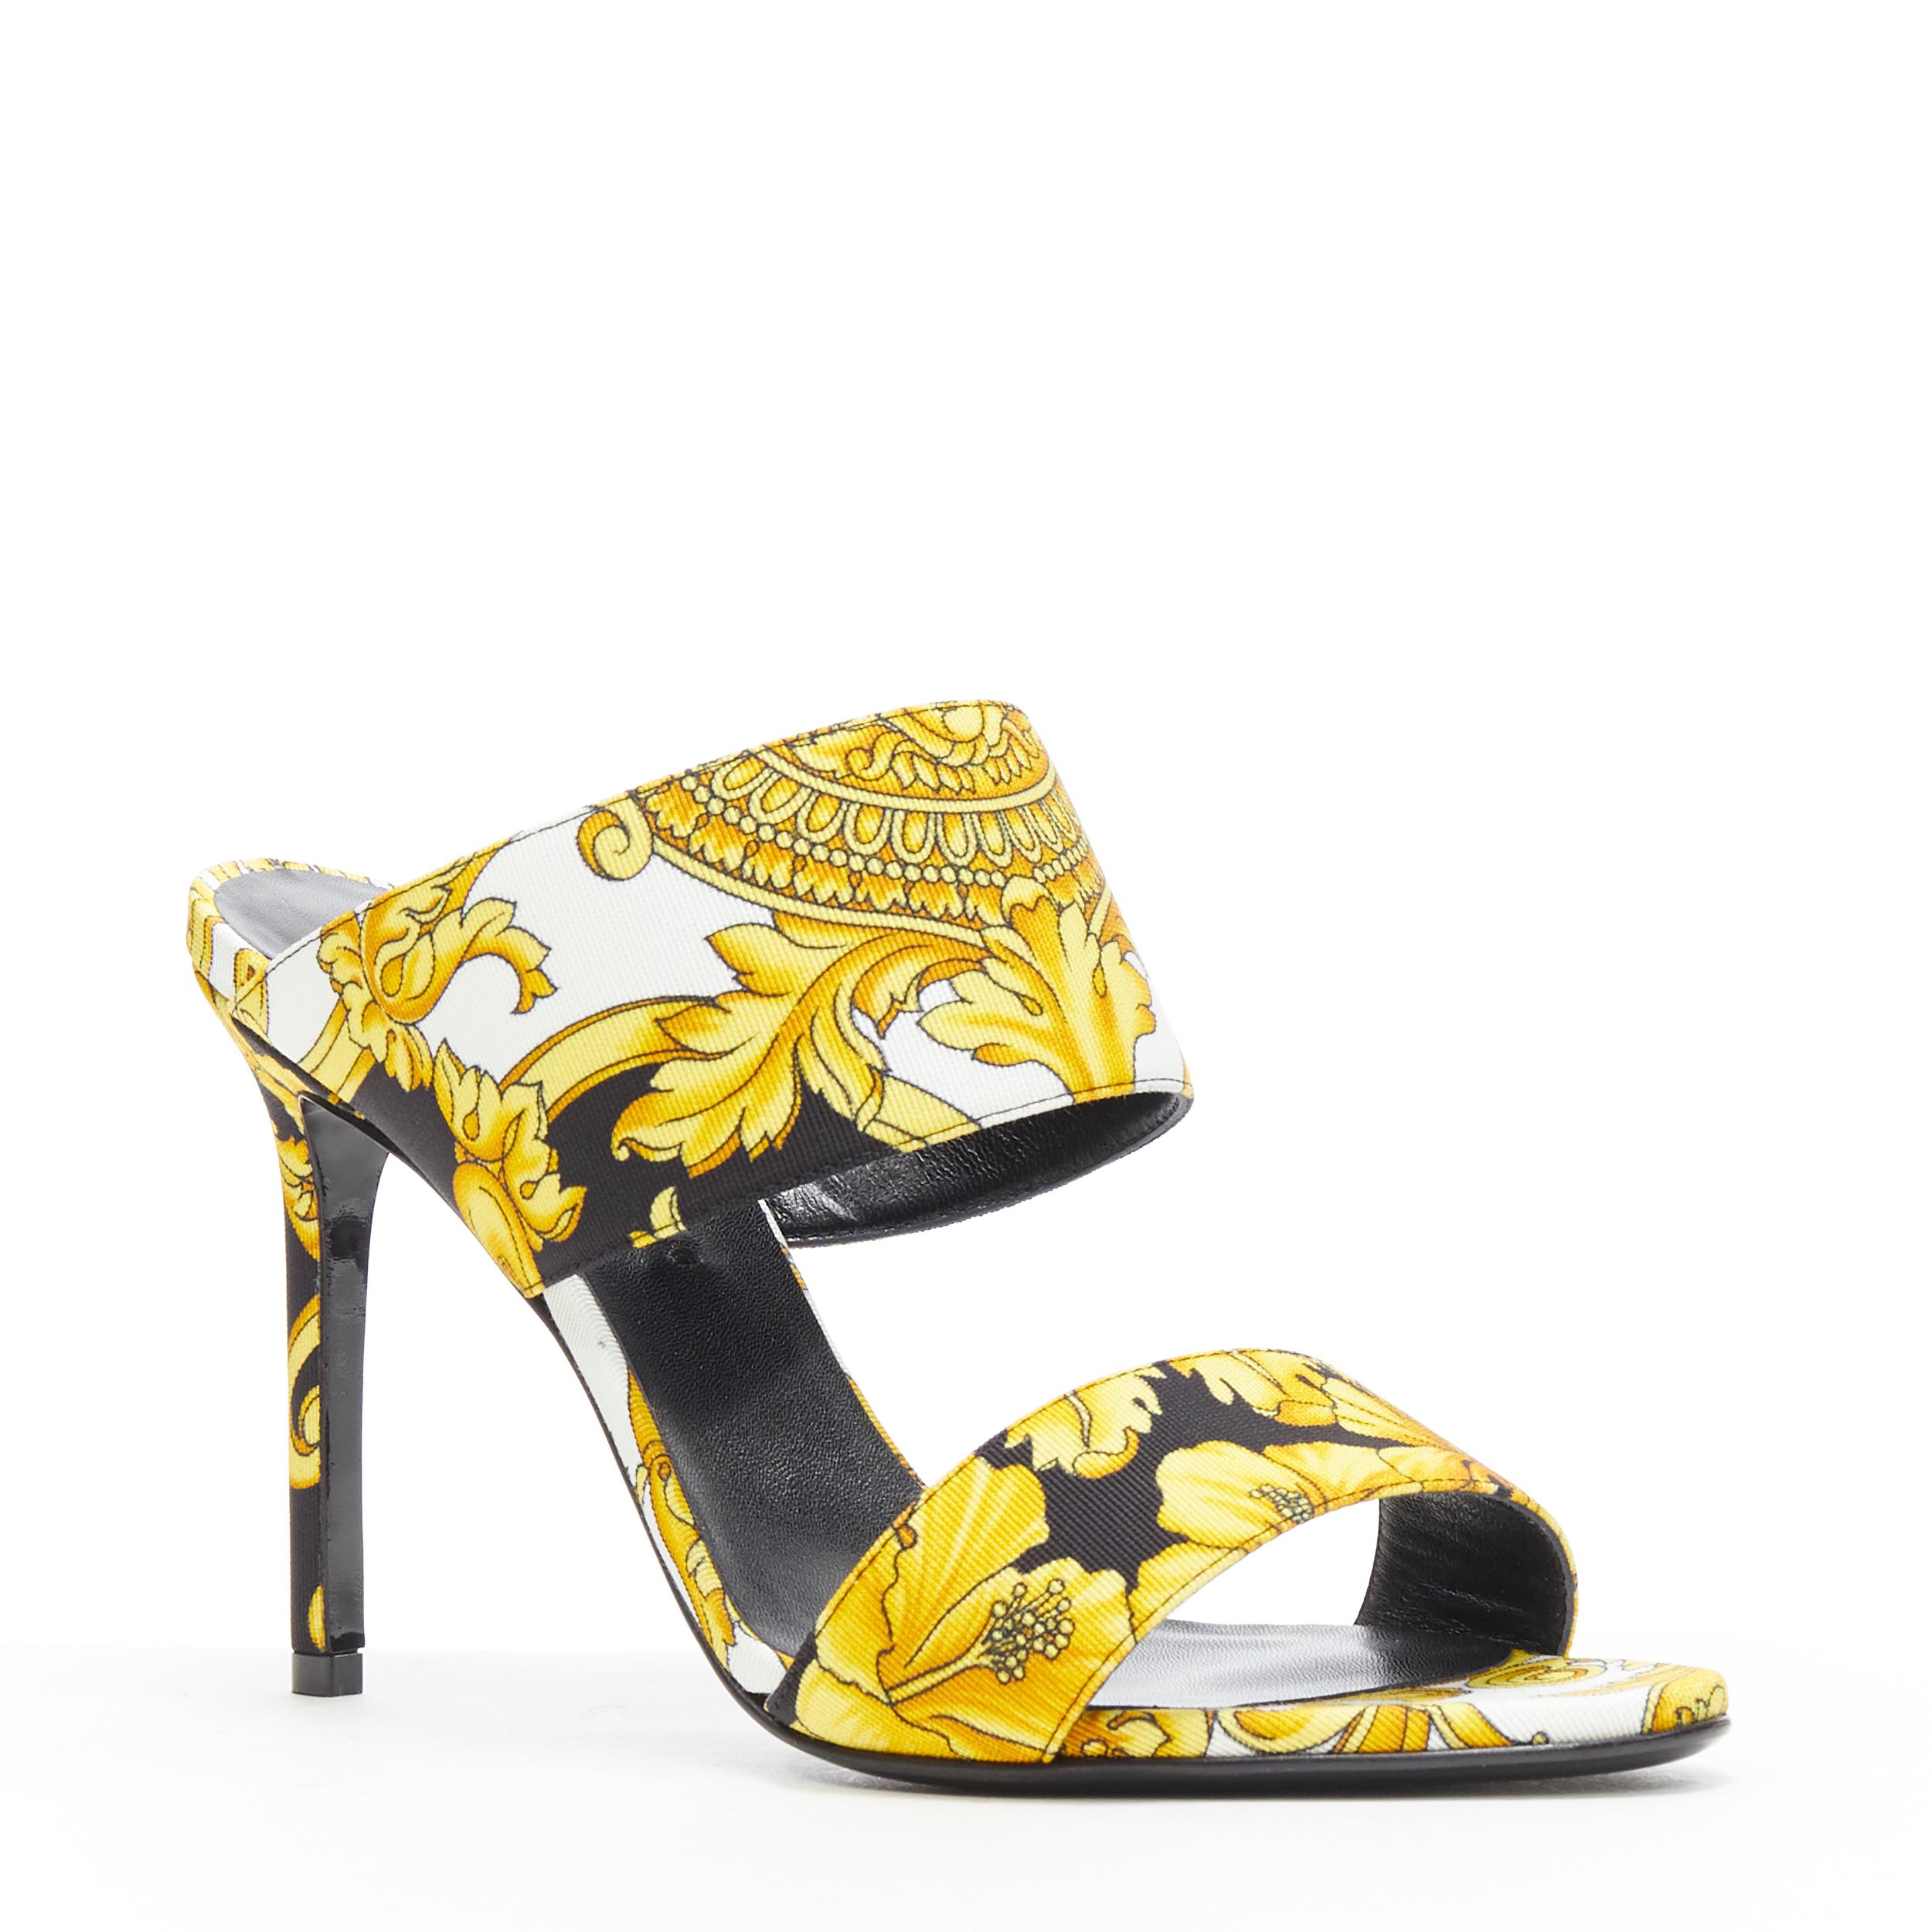 new VERSACE black gold Barocco Hibiscus print fabric open toe mule sandals EU38
Brand: Versace
Designer: Donatella Versace
Collection: 2019
Model Name / Style: Barocco mule
Material: Fabric
Color: Black, gold
Pattern: Floral
Extra Detail: Signature